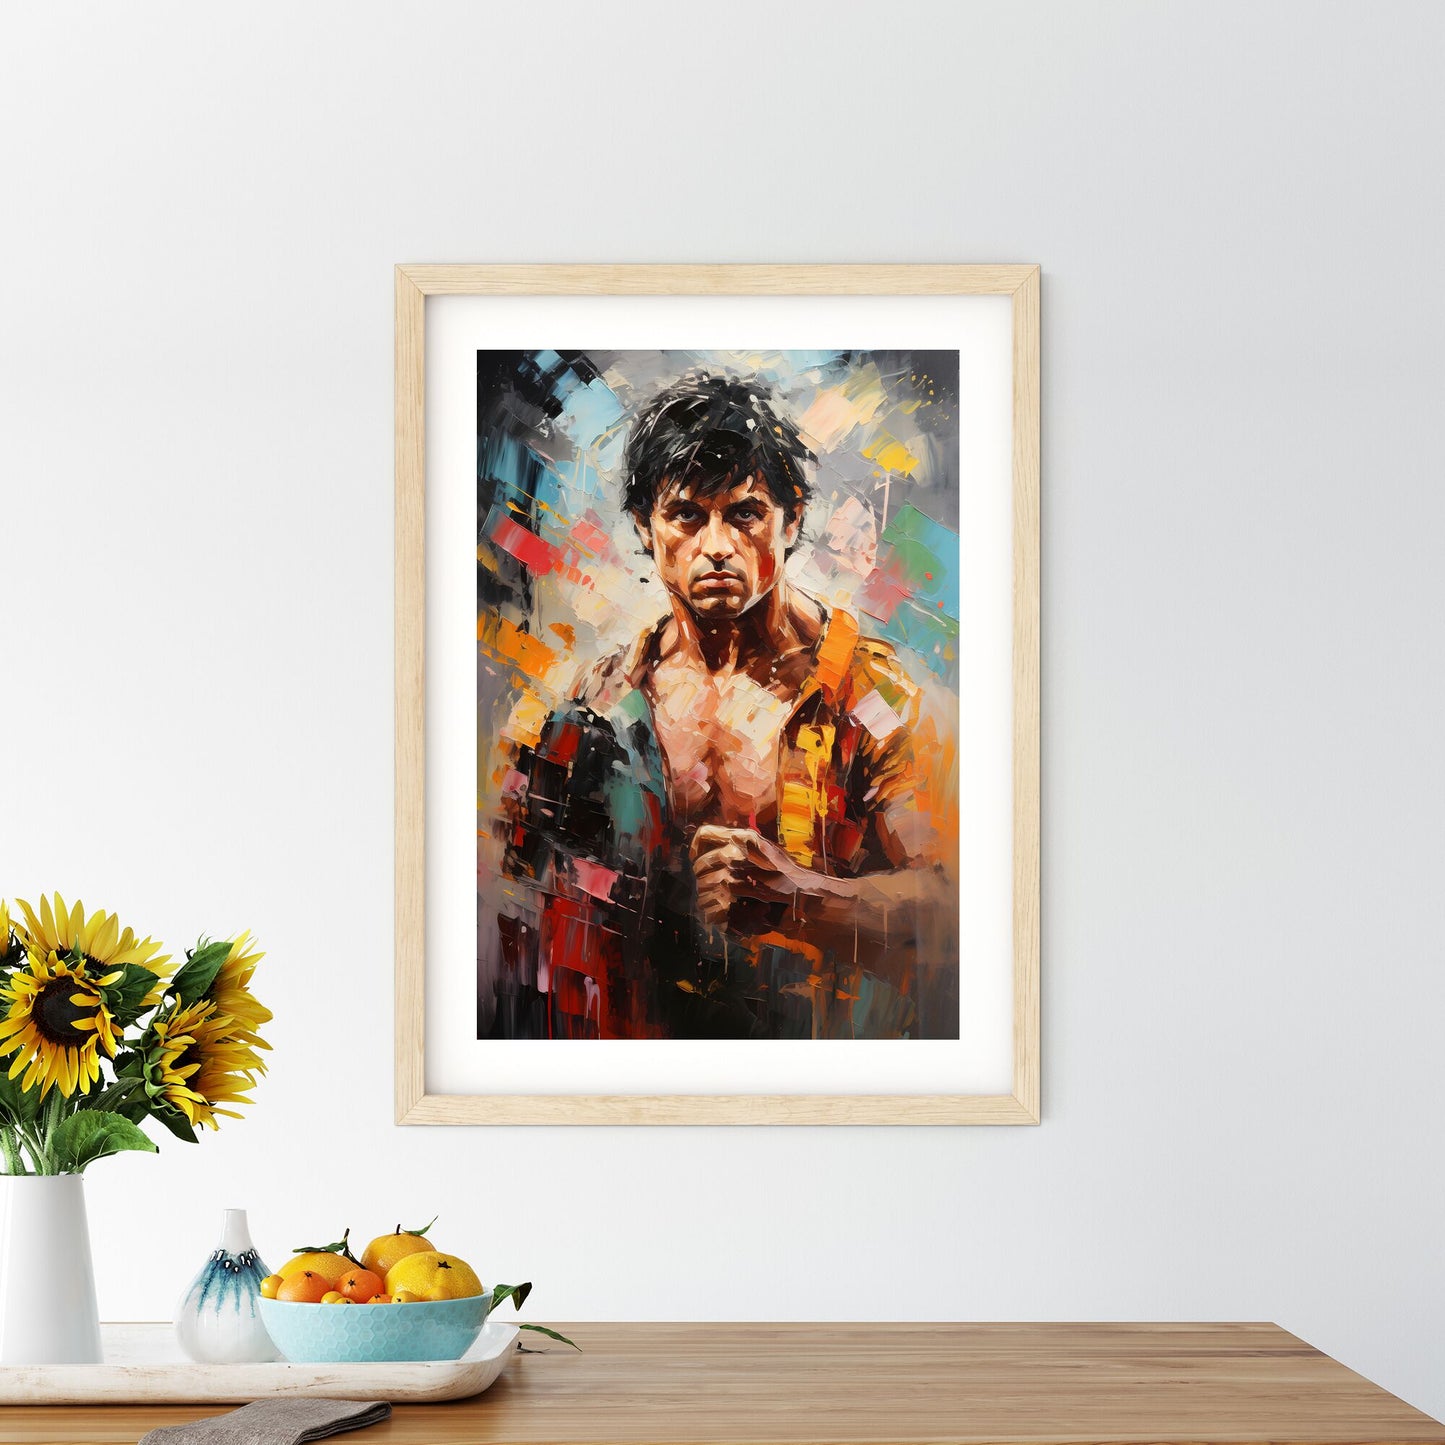 Rocky Balboa Sylvester Stallone - A Painting Of A Man Default Title